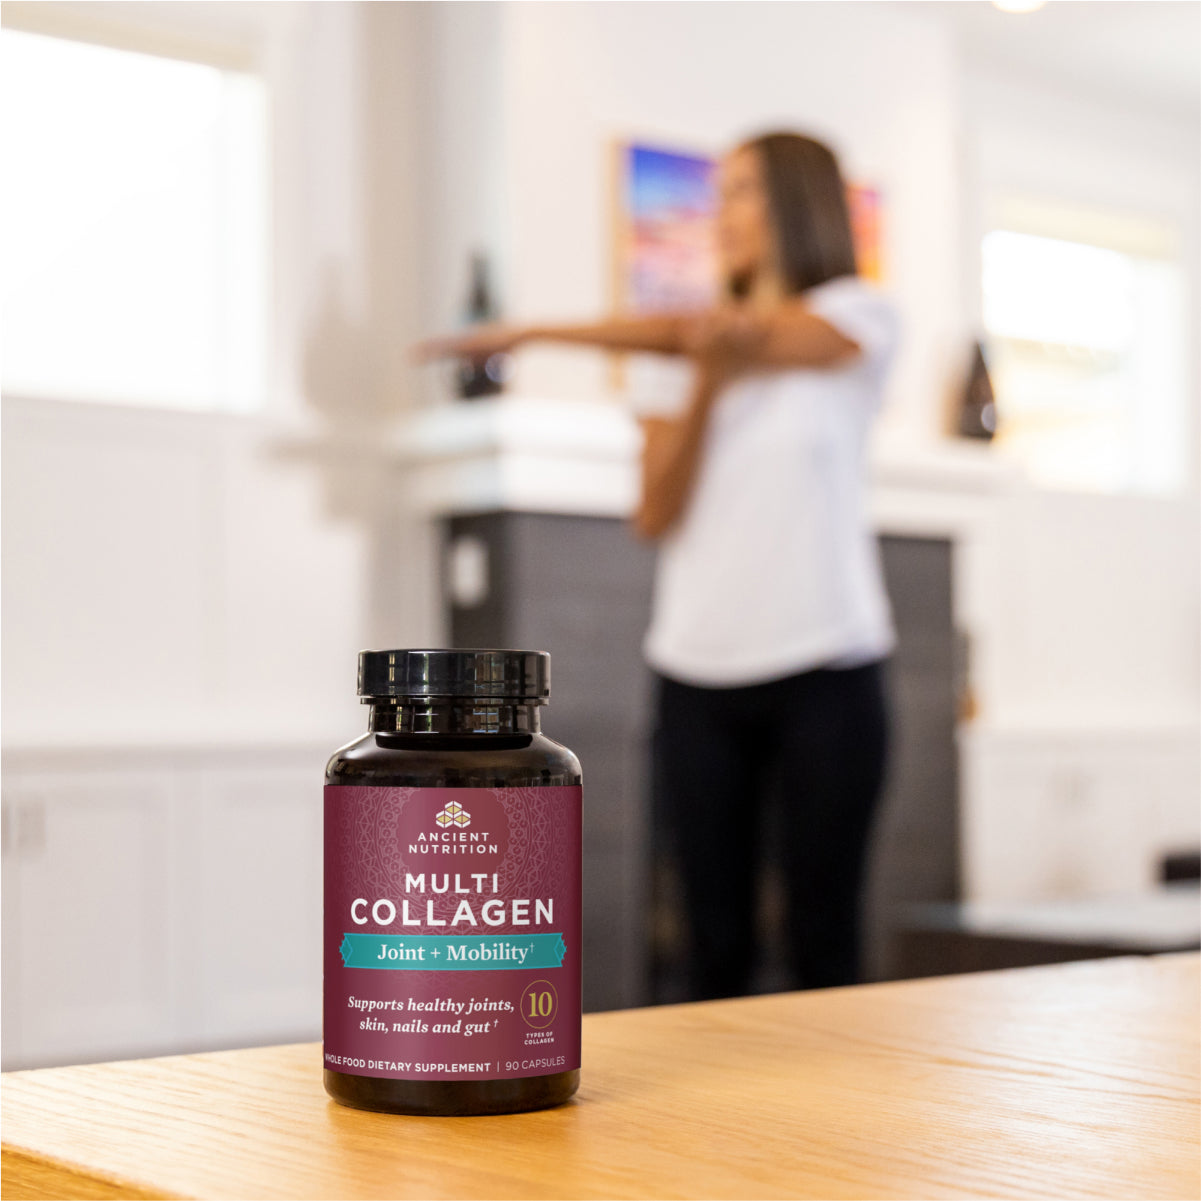 bottle of multi collagen capsules joint + mobility with a woman stretching in the background